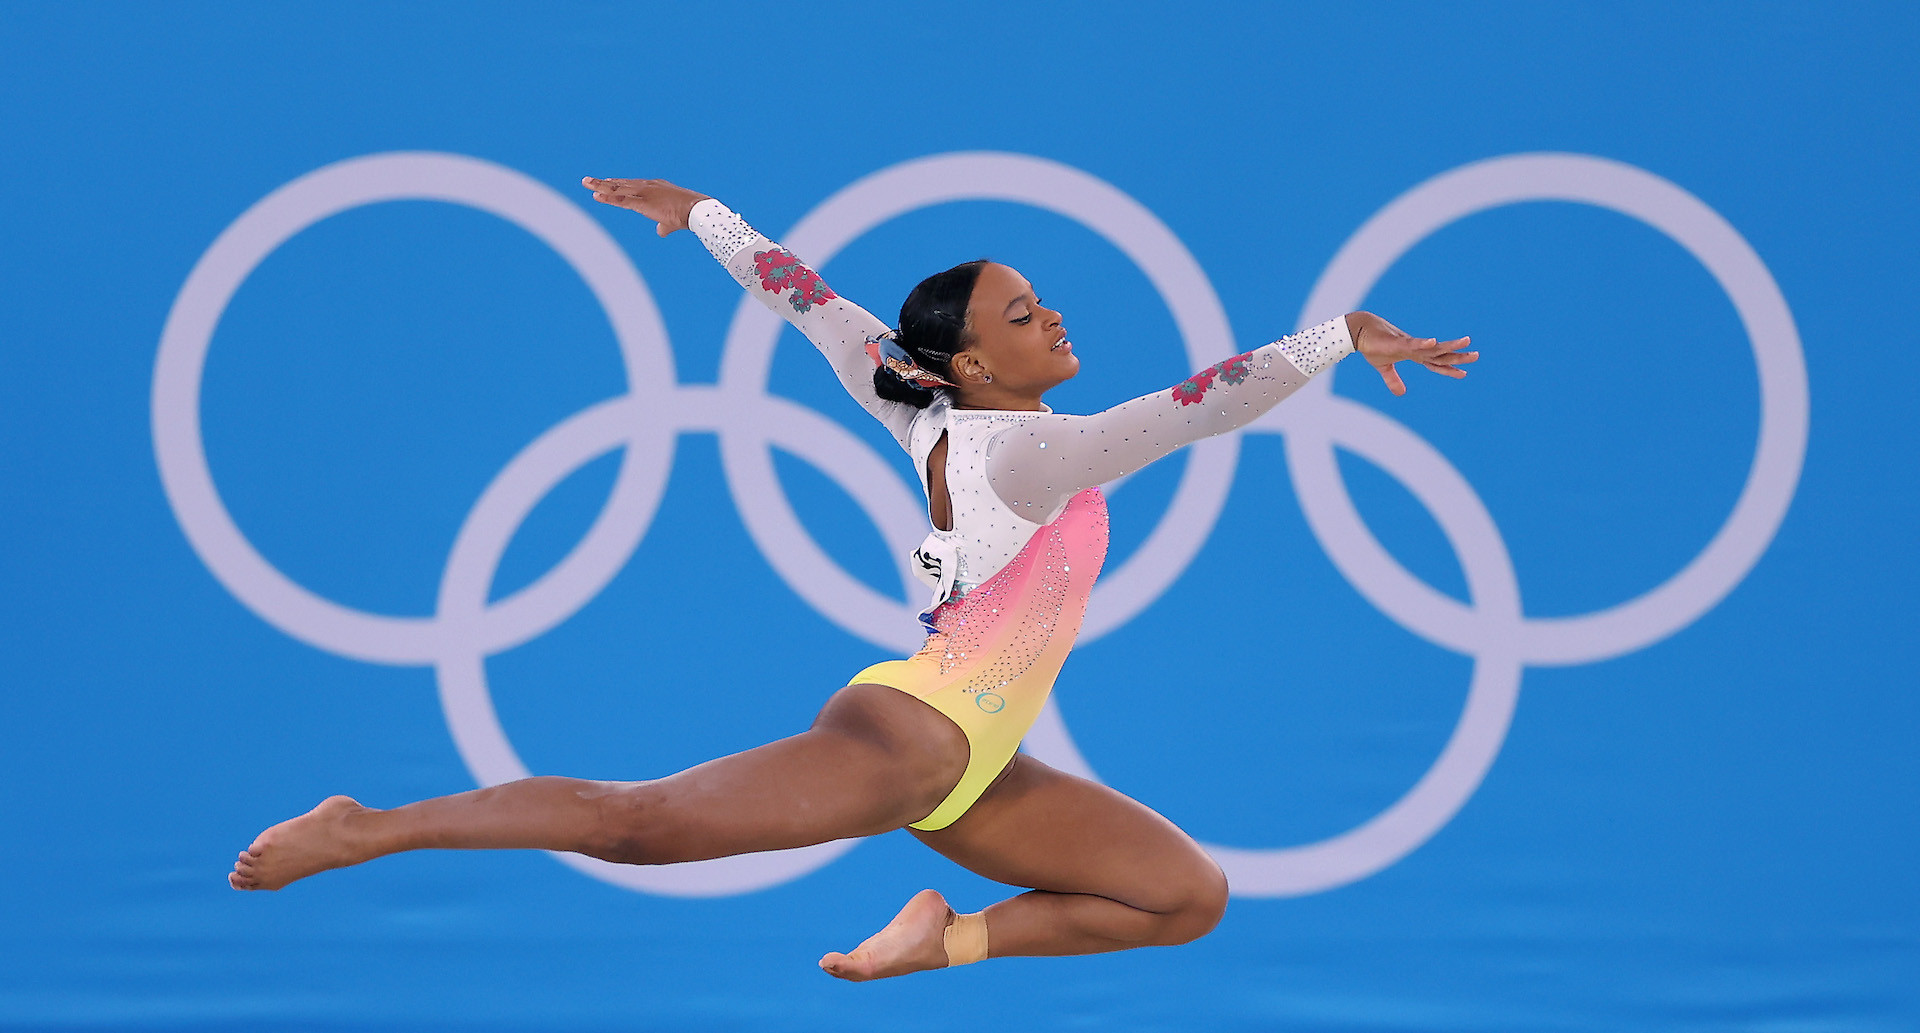 Andrade in the Women's Floor Finals of the Tokyo 2020 Olympic Games. GETTY IMAGES